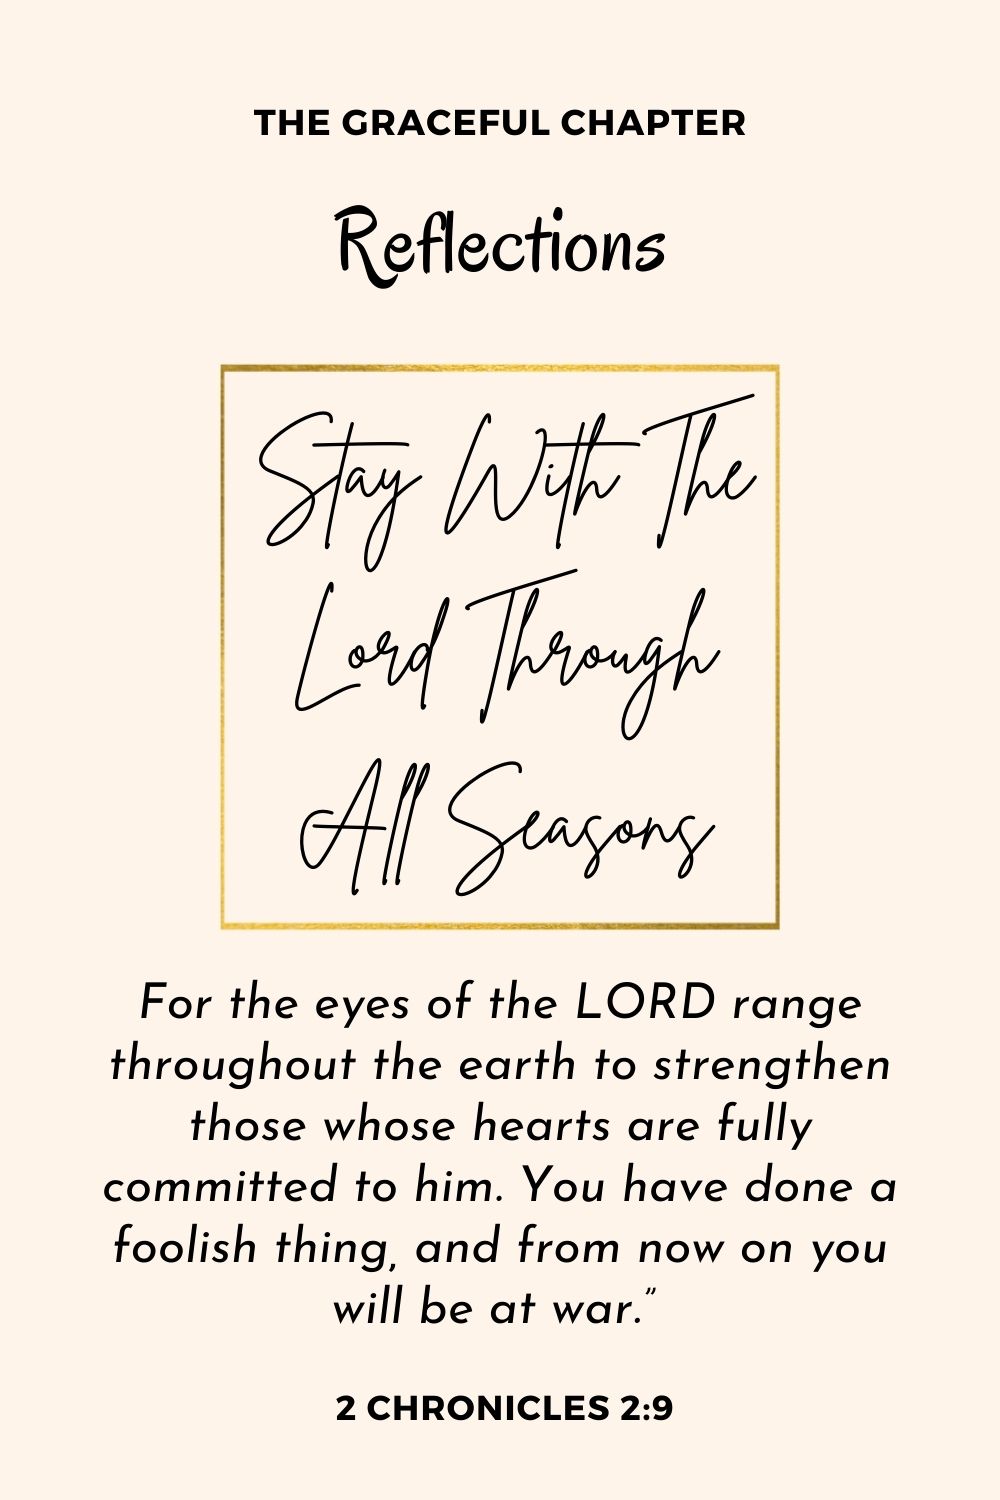 Reflection - 2 Chronicles 2:9 - Stay With The Lord Through All Seasons